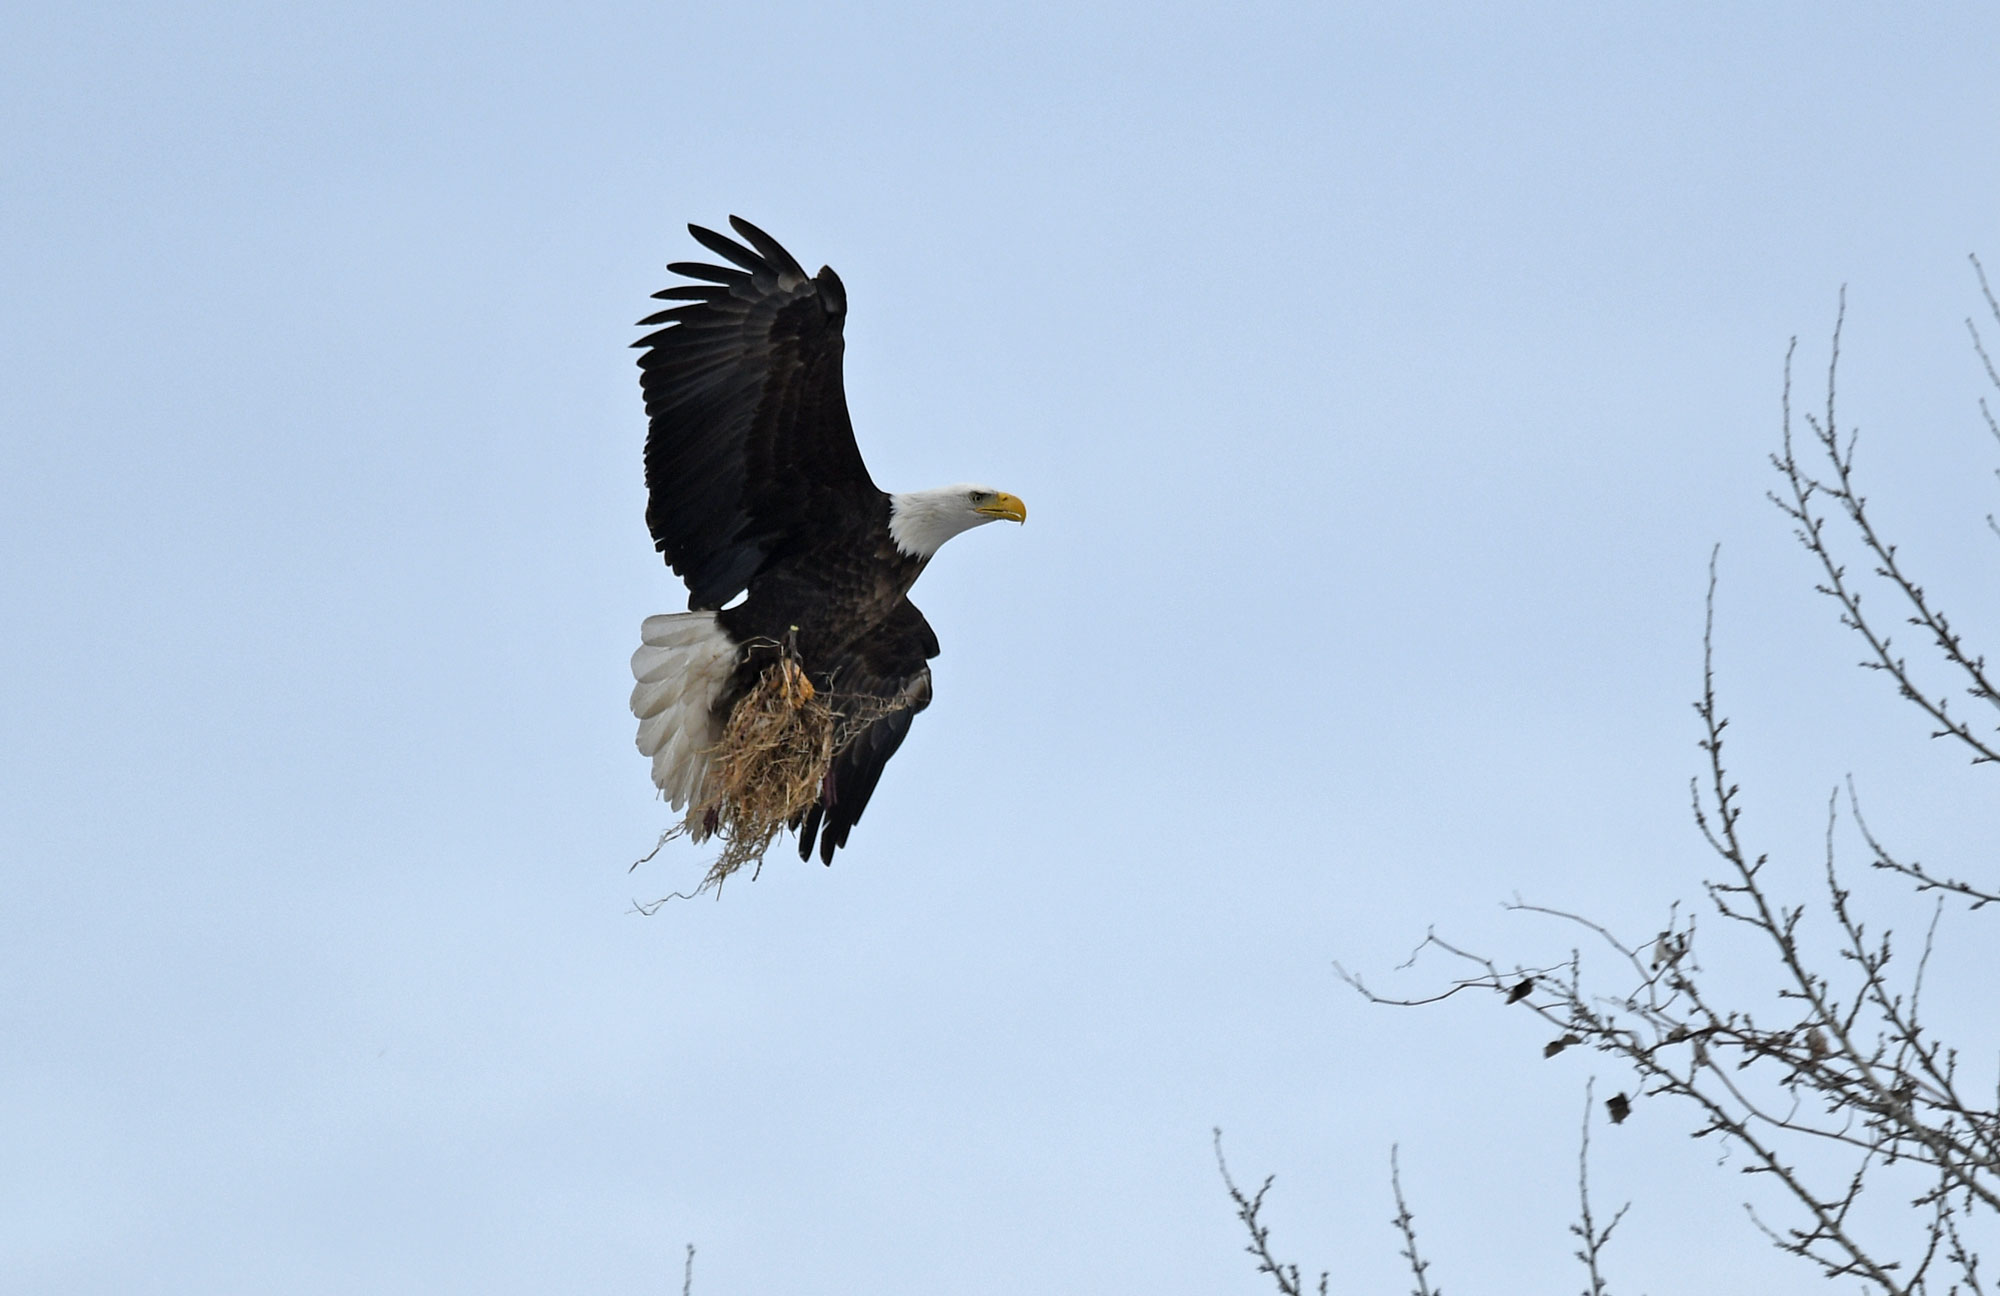 Bald eagle soaring with nesting material